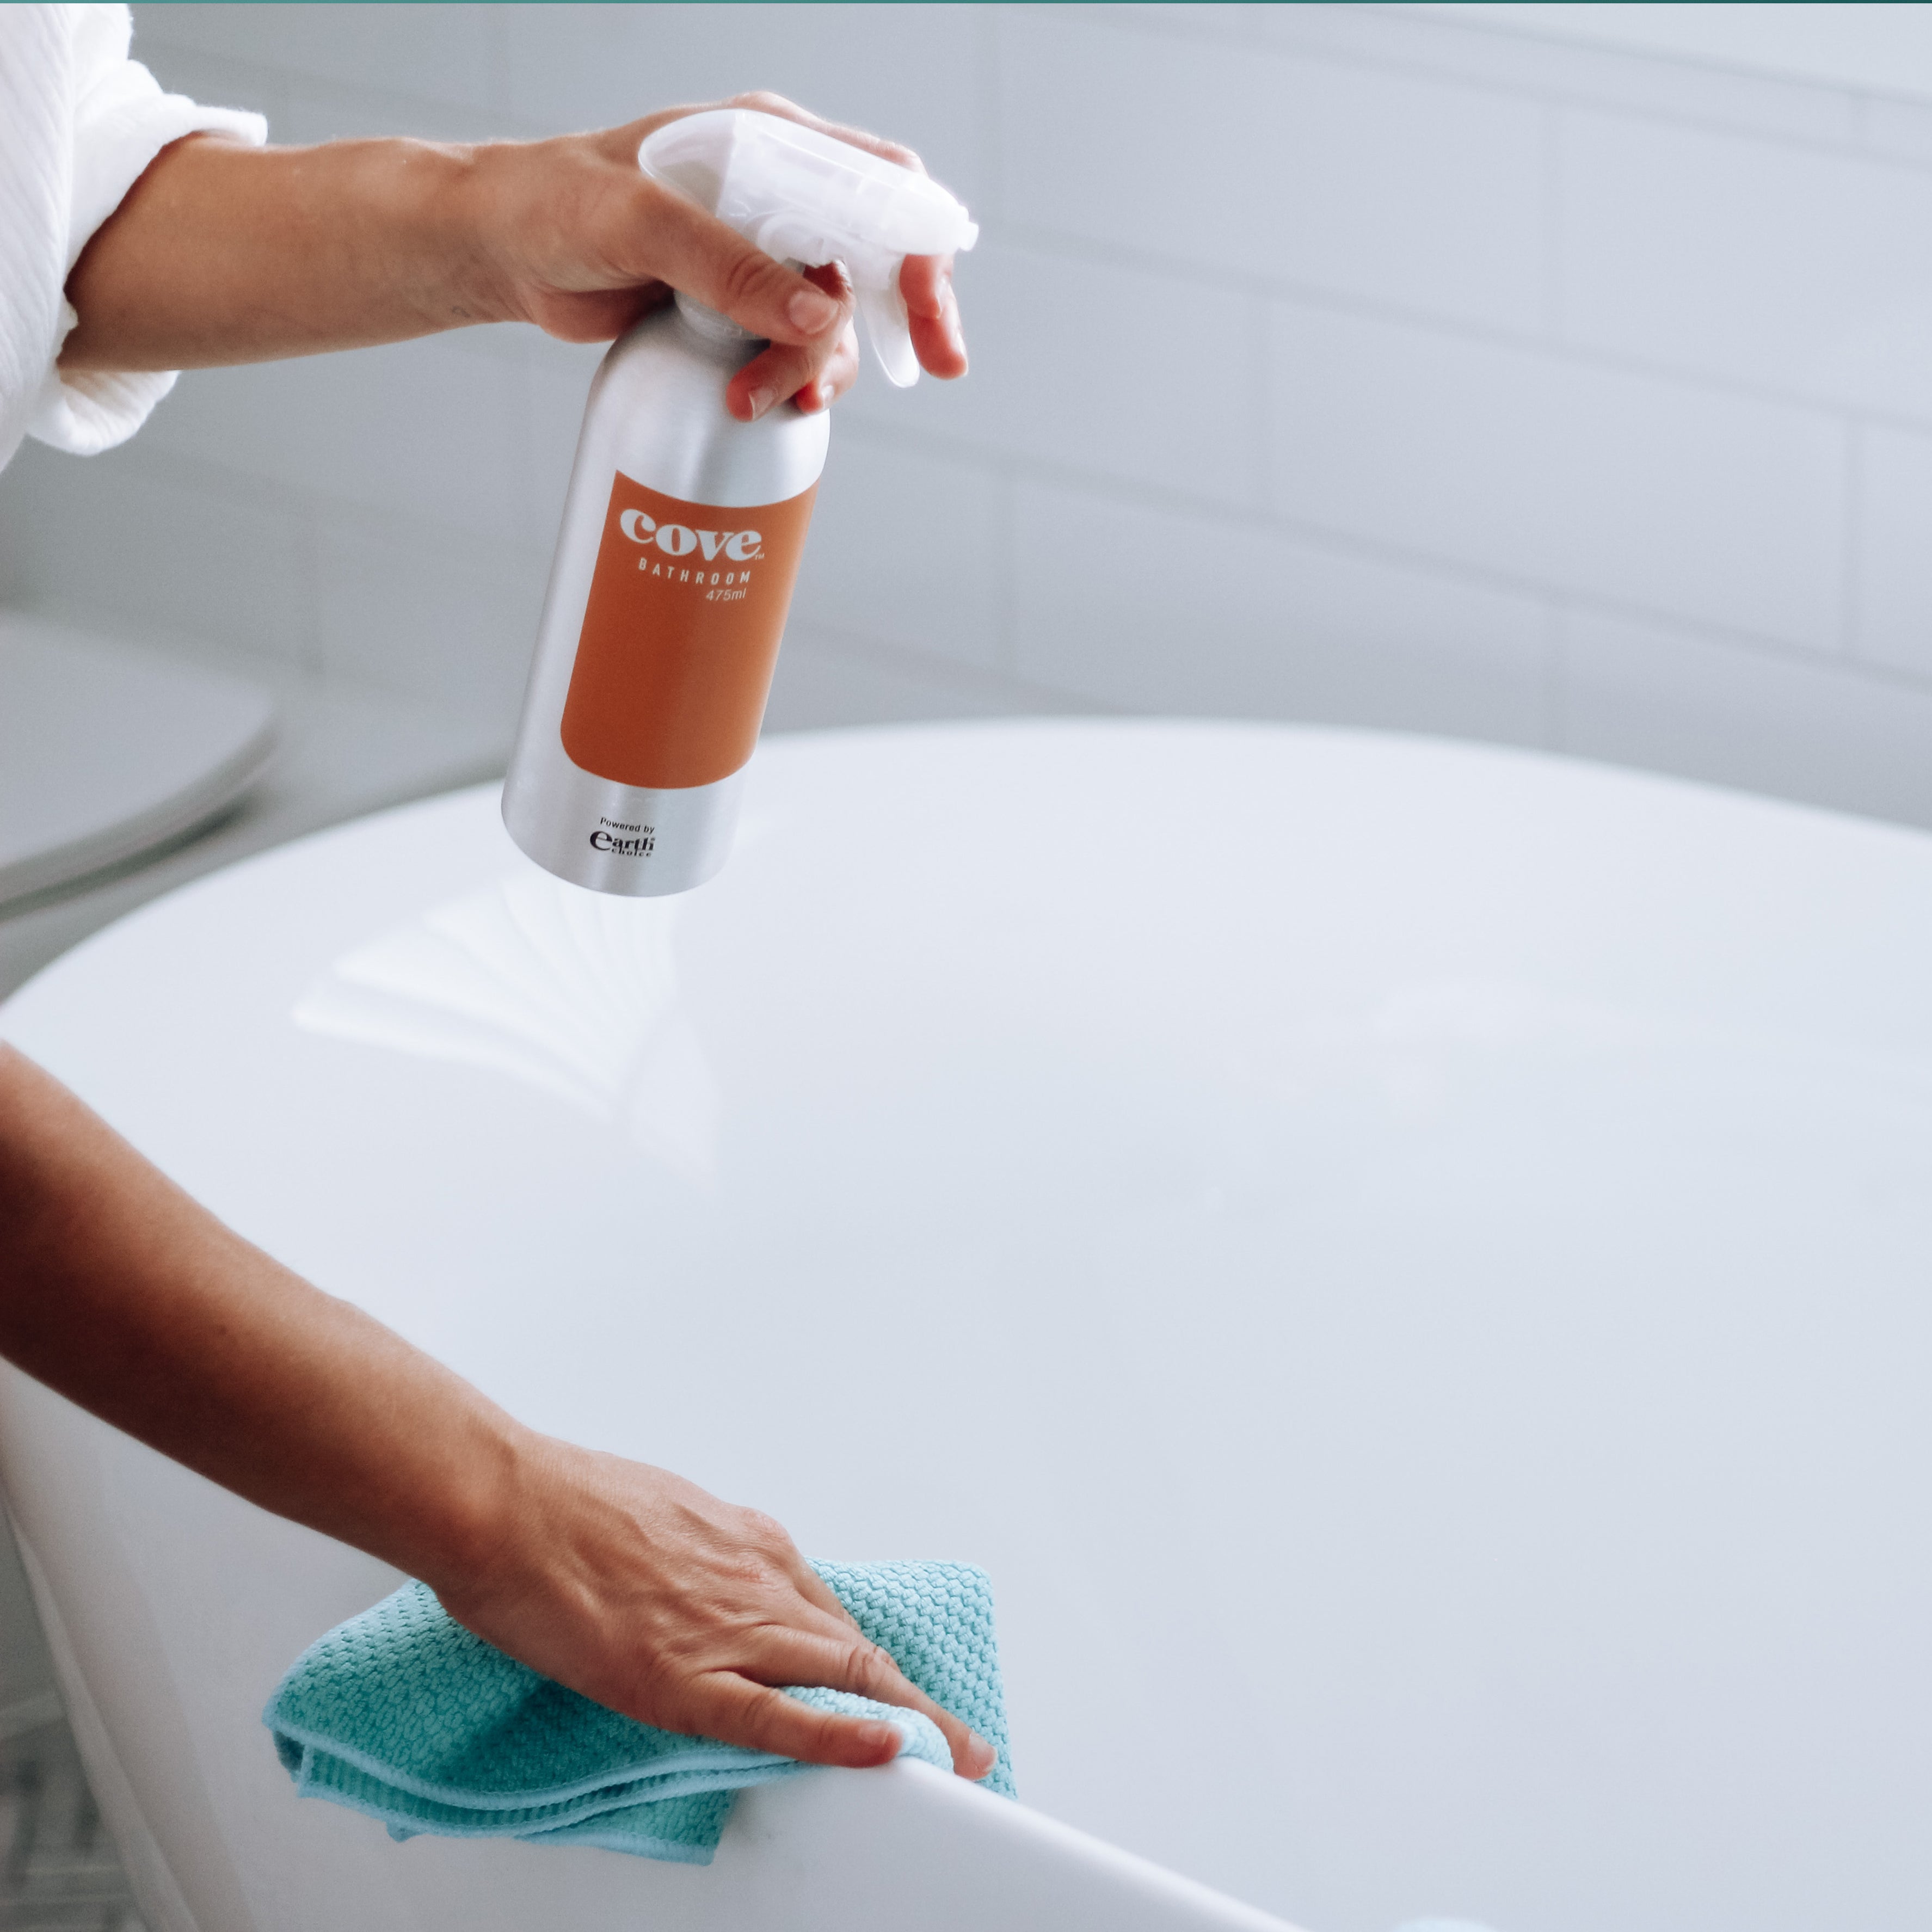 Refillable Bathroom Cleaning Products